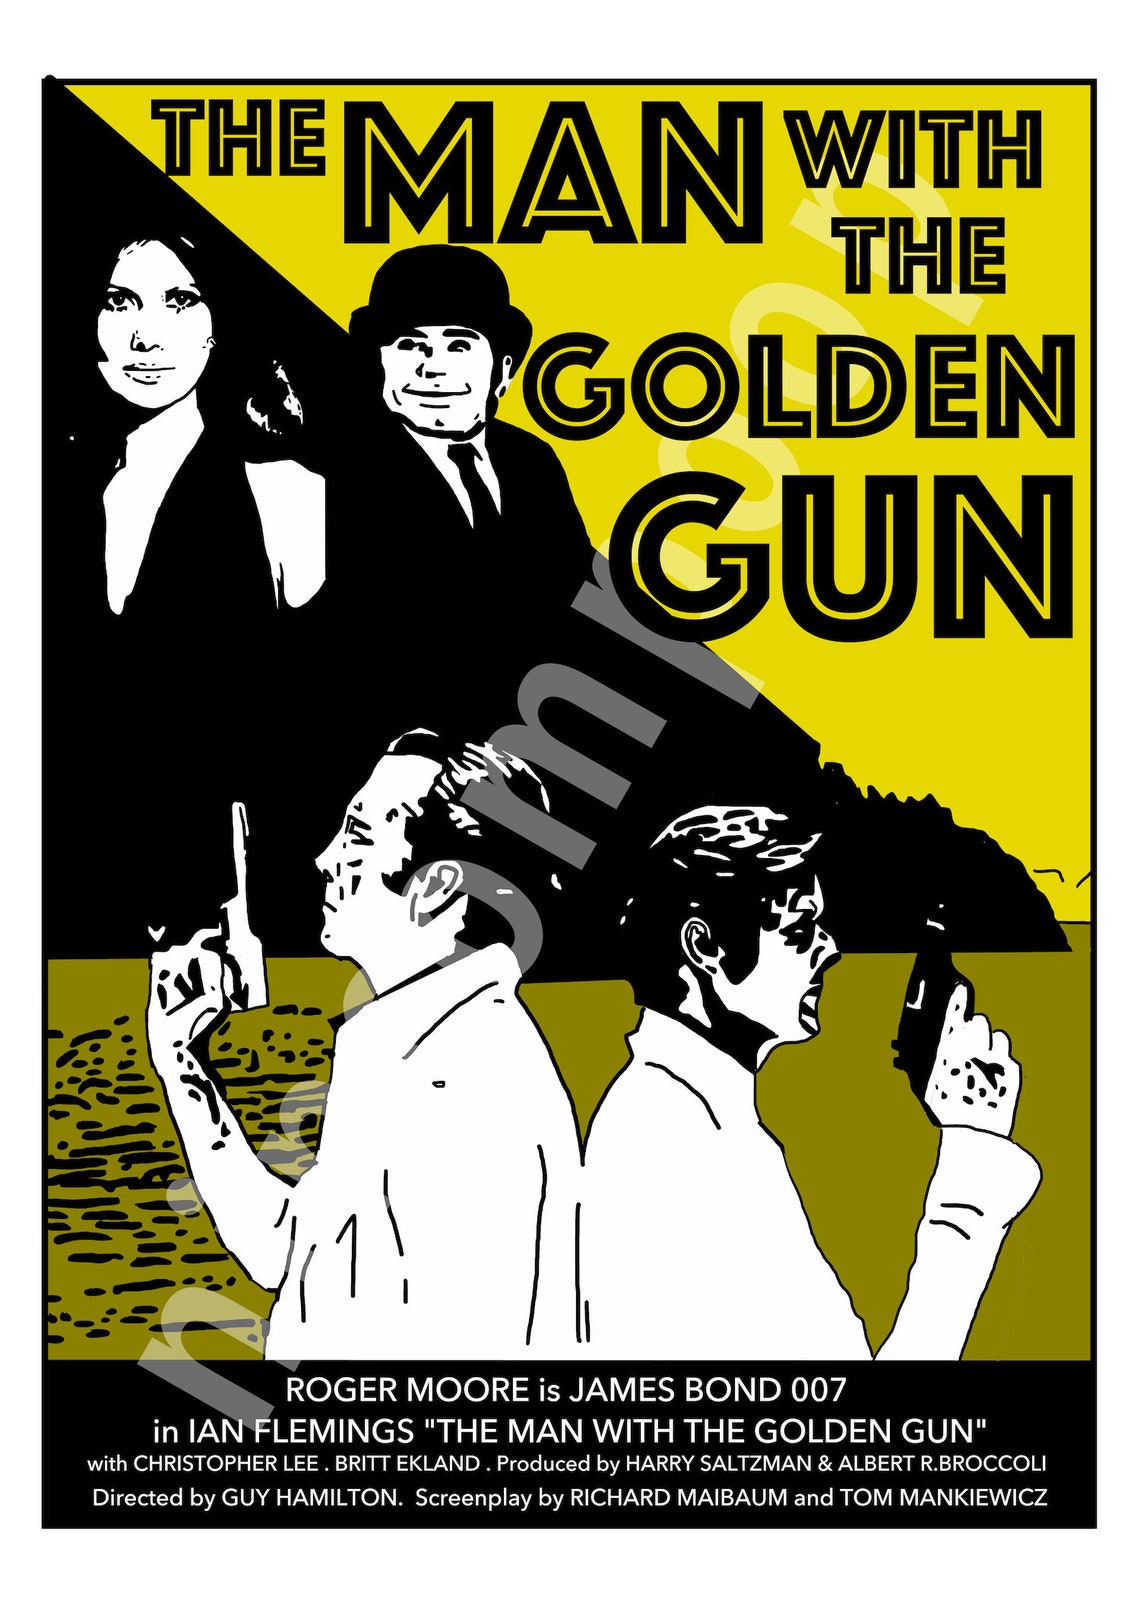 The Man with the Golden Gun 1974 Poster | Etsy